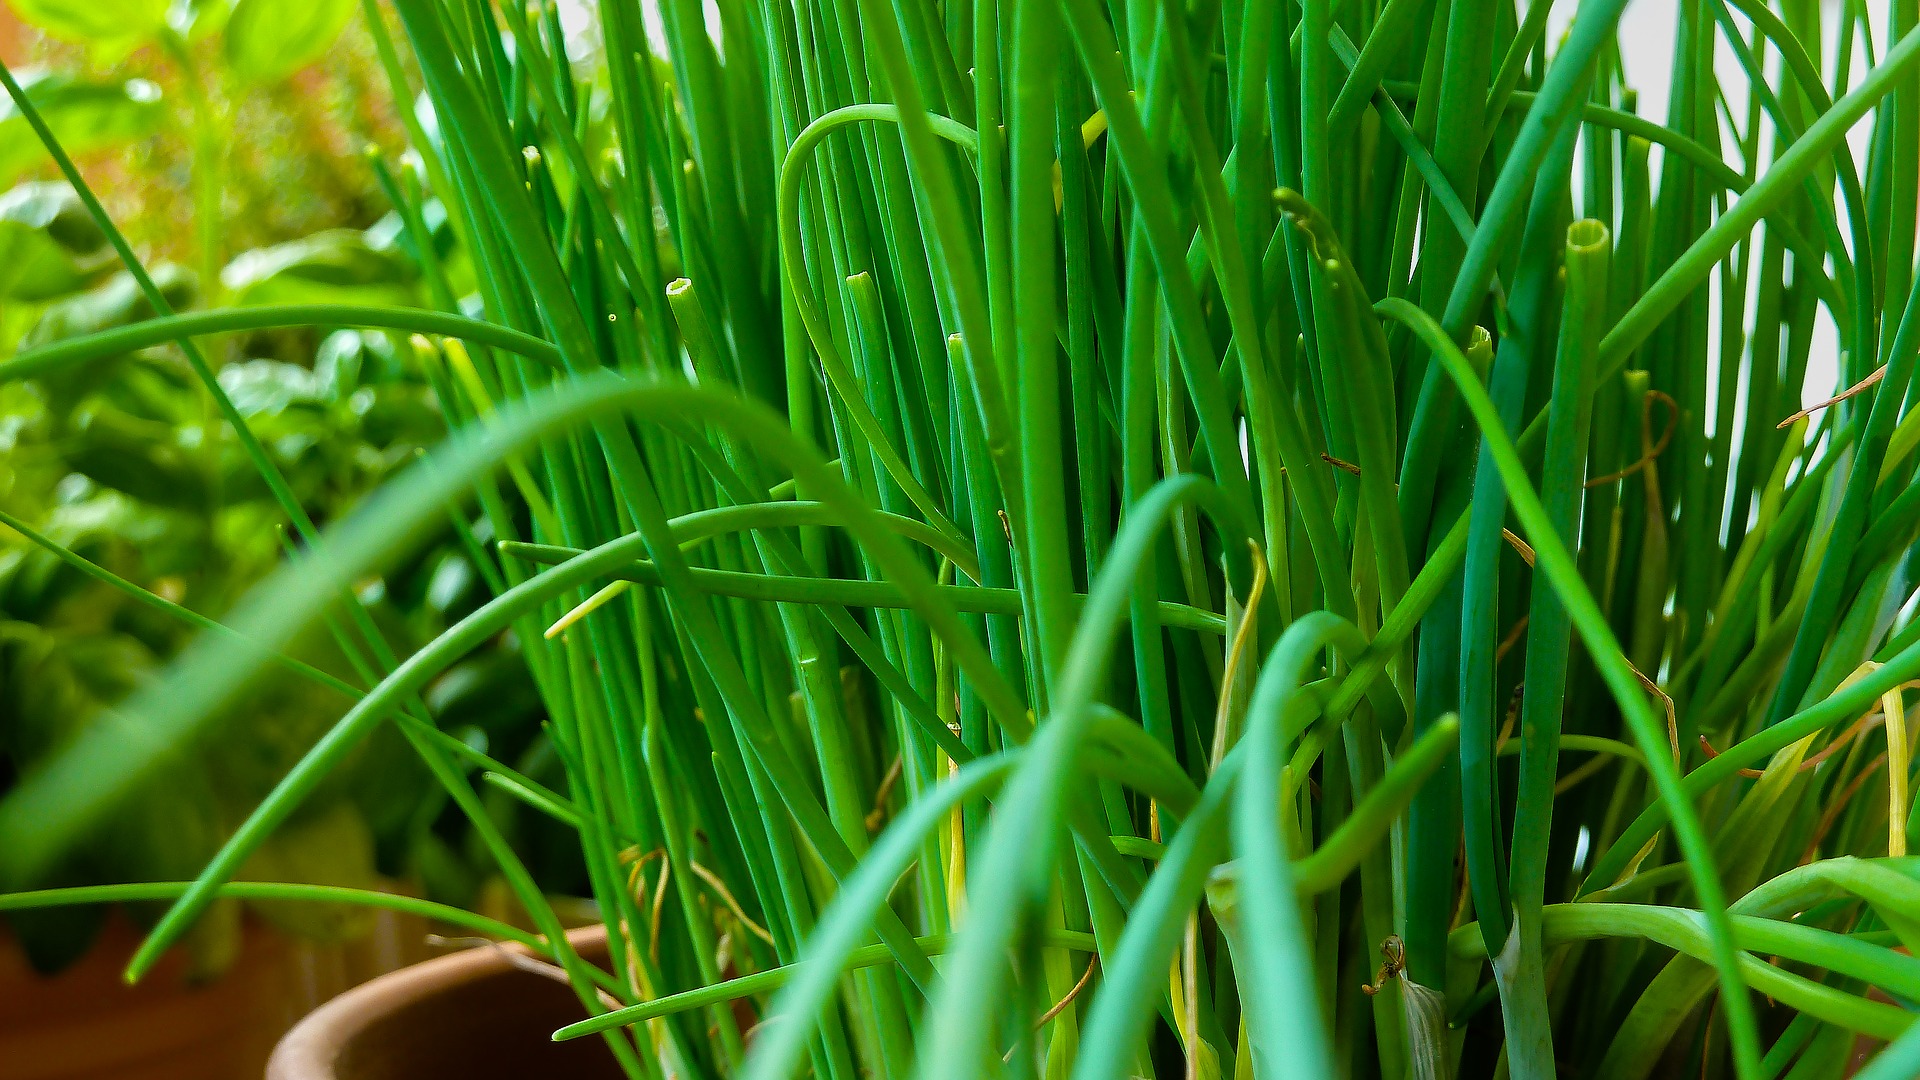 How to grow a fresh supply of chives